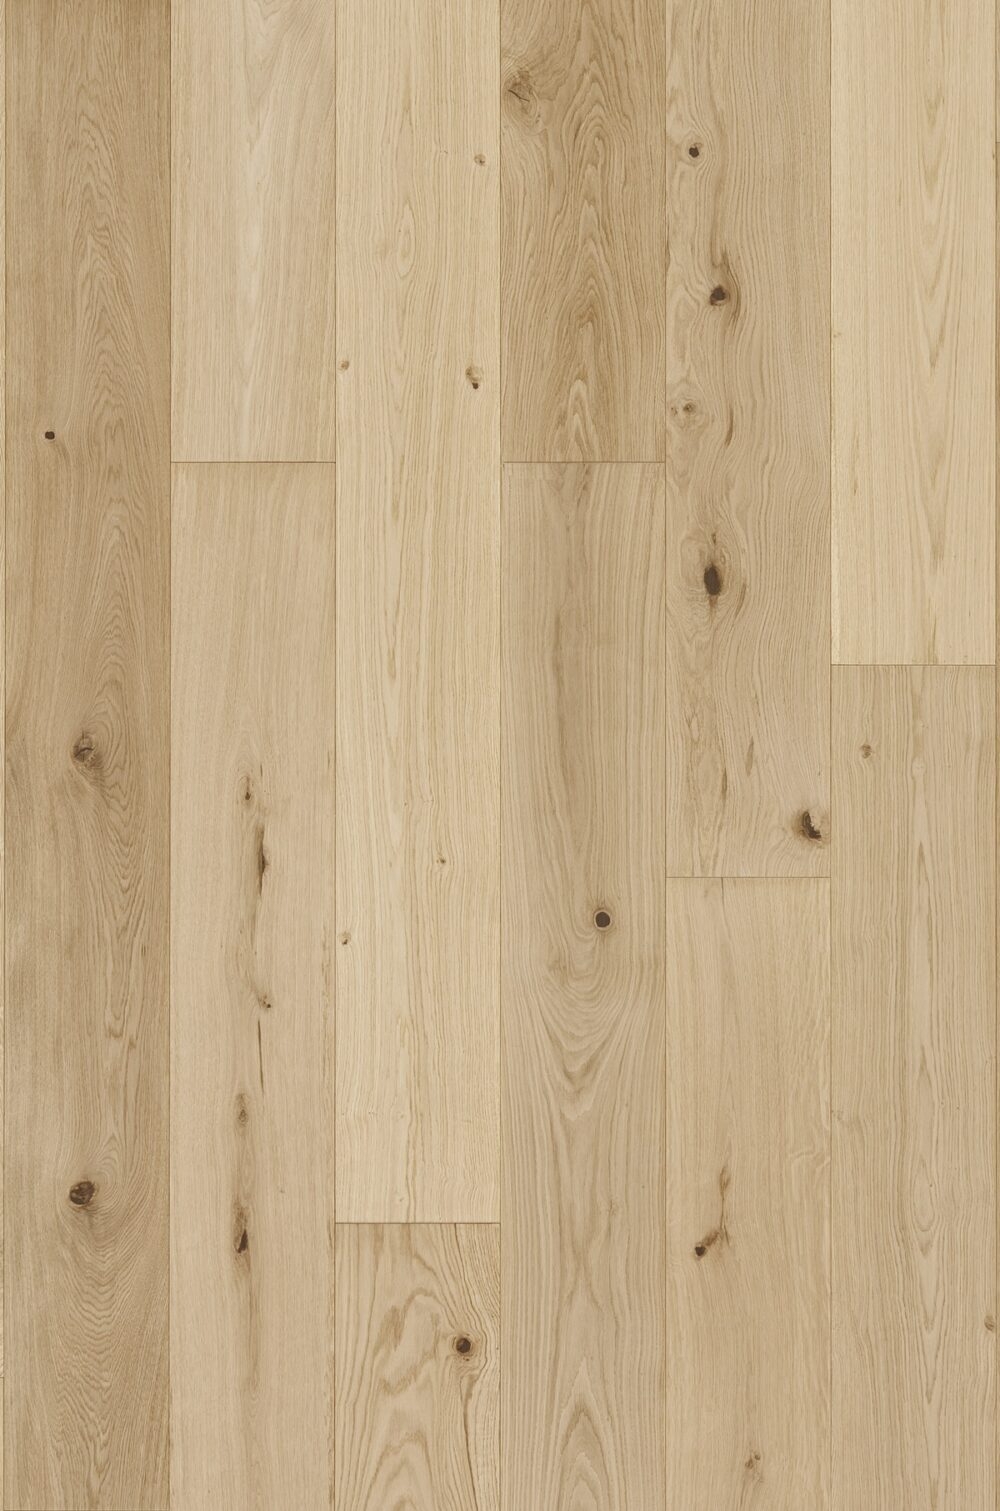 Brentwood hills Pacifico Engineered Hardwood Swatch